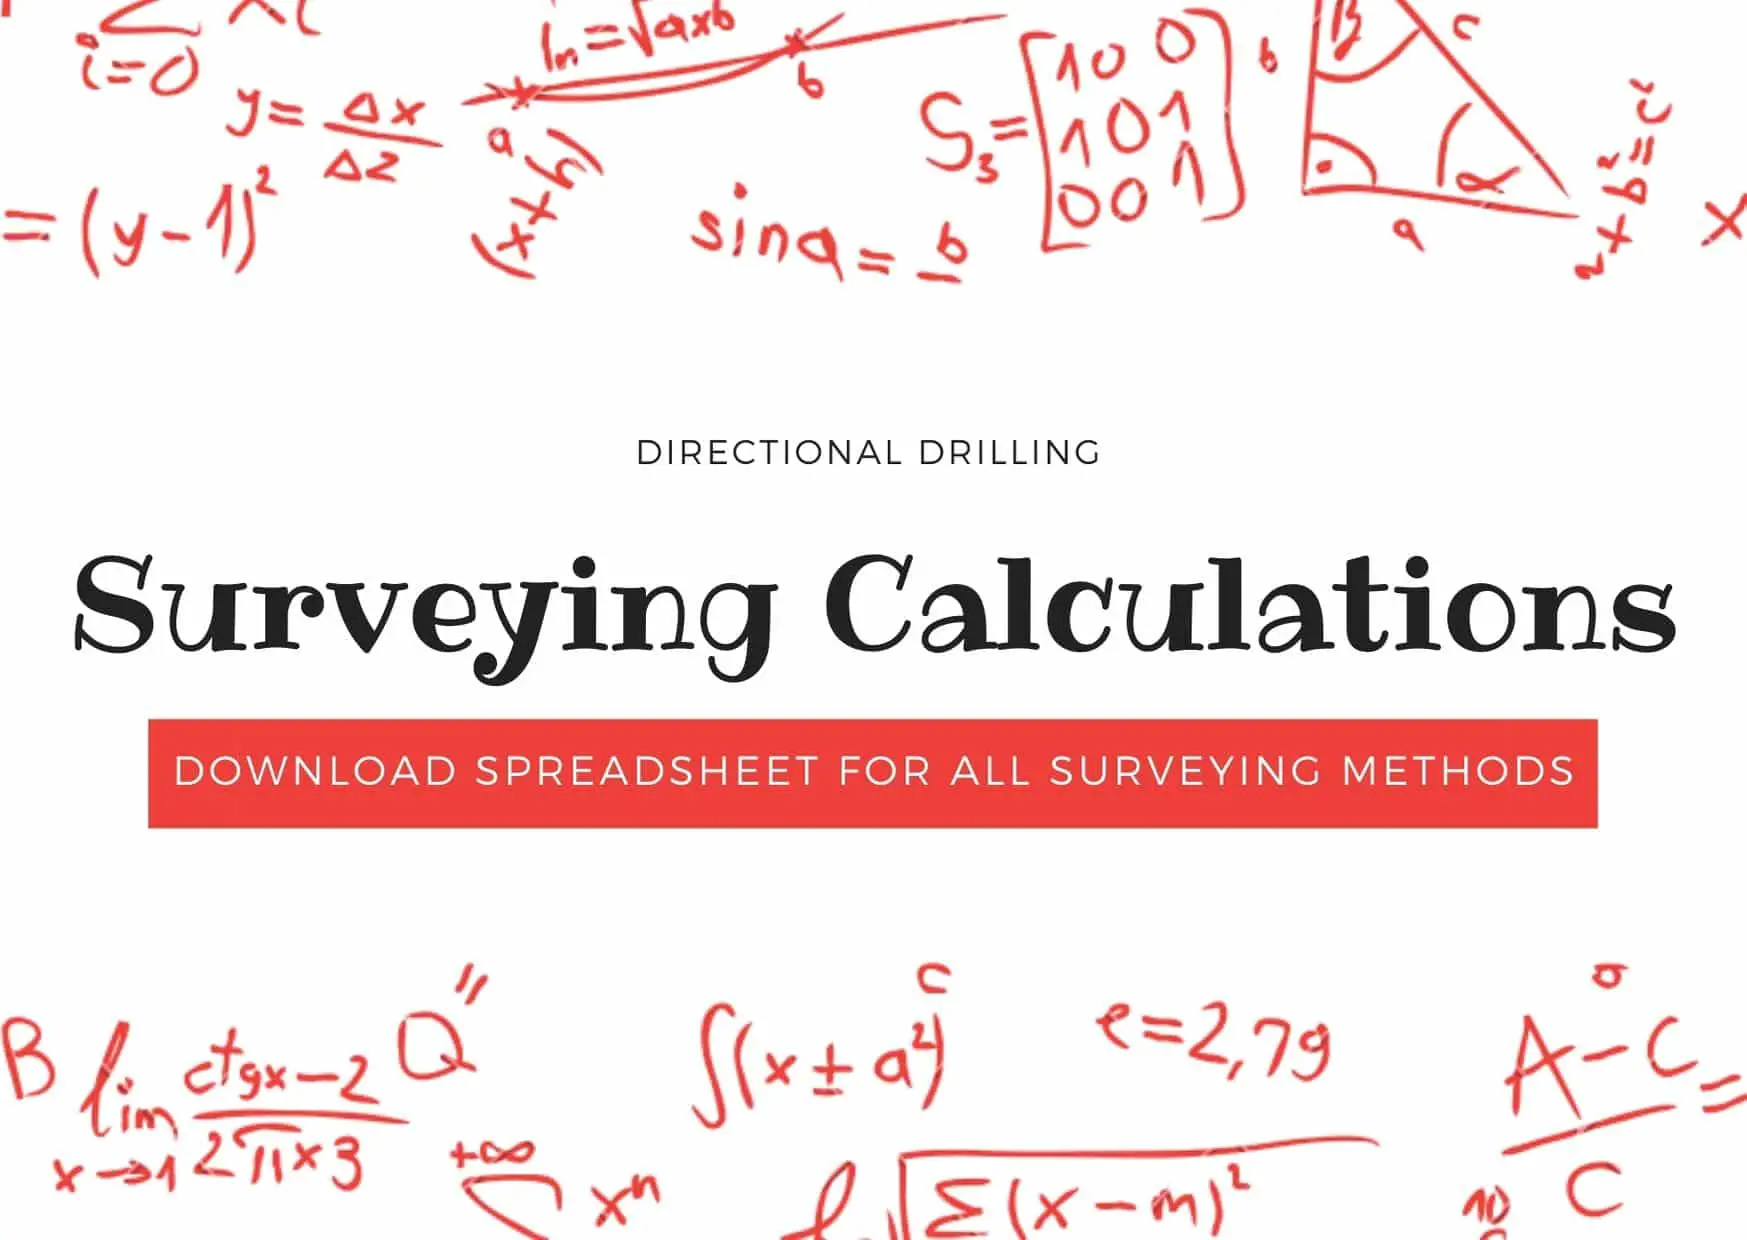 directional drilling survey calculations methods and terminology excel spreadsheet